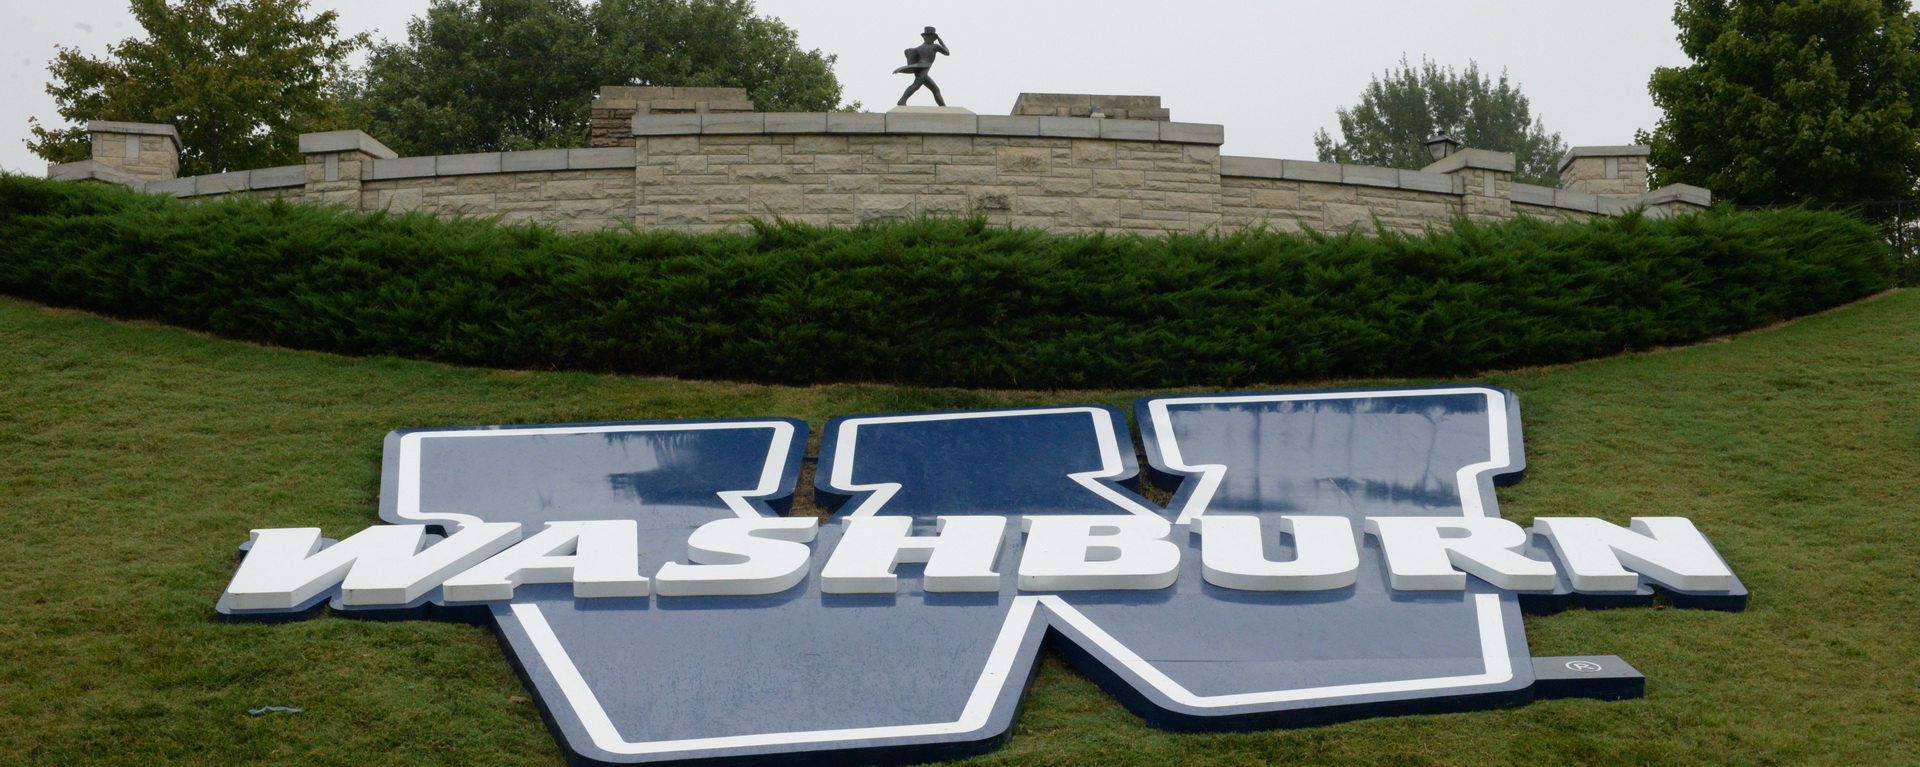 washburn logo at north end of Yager statidum with ichabod statue in background